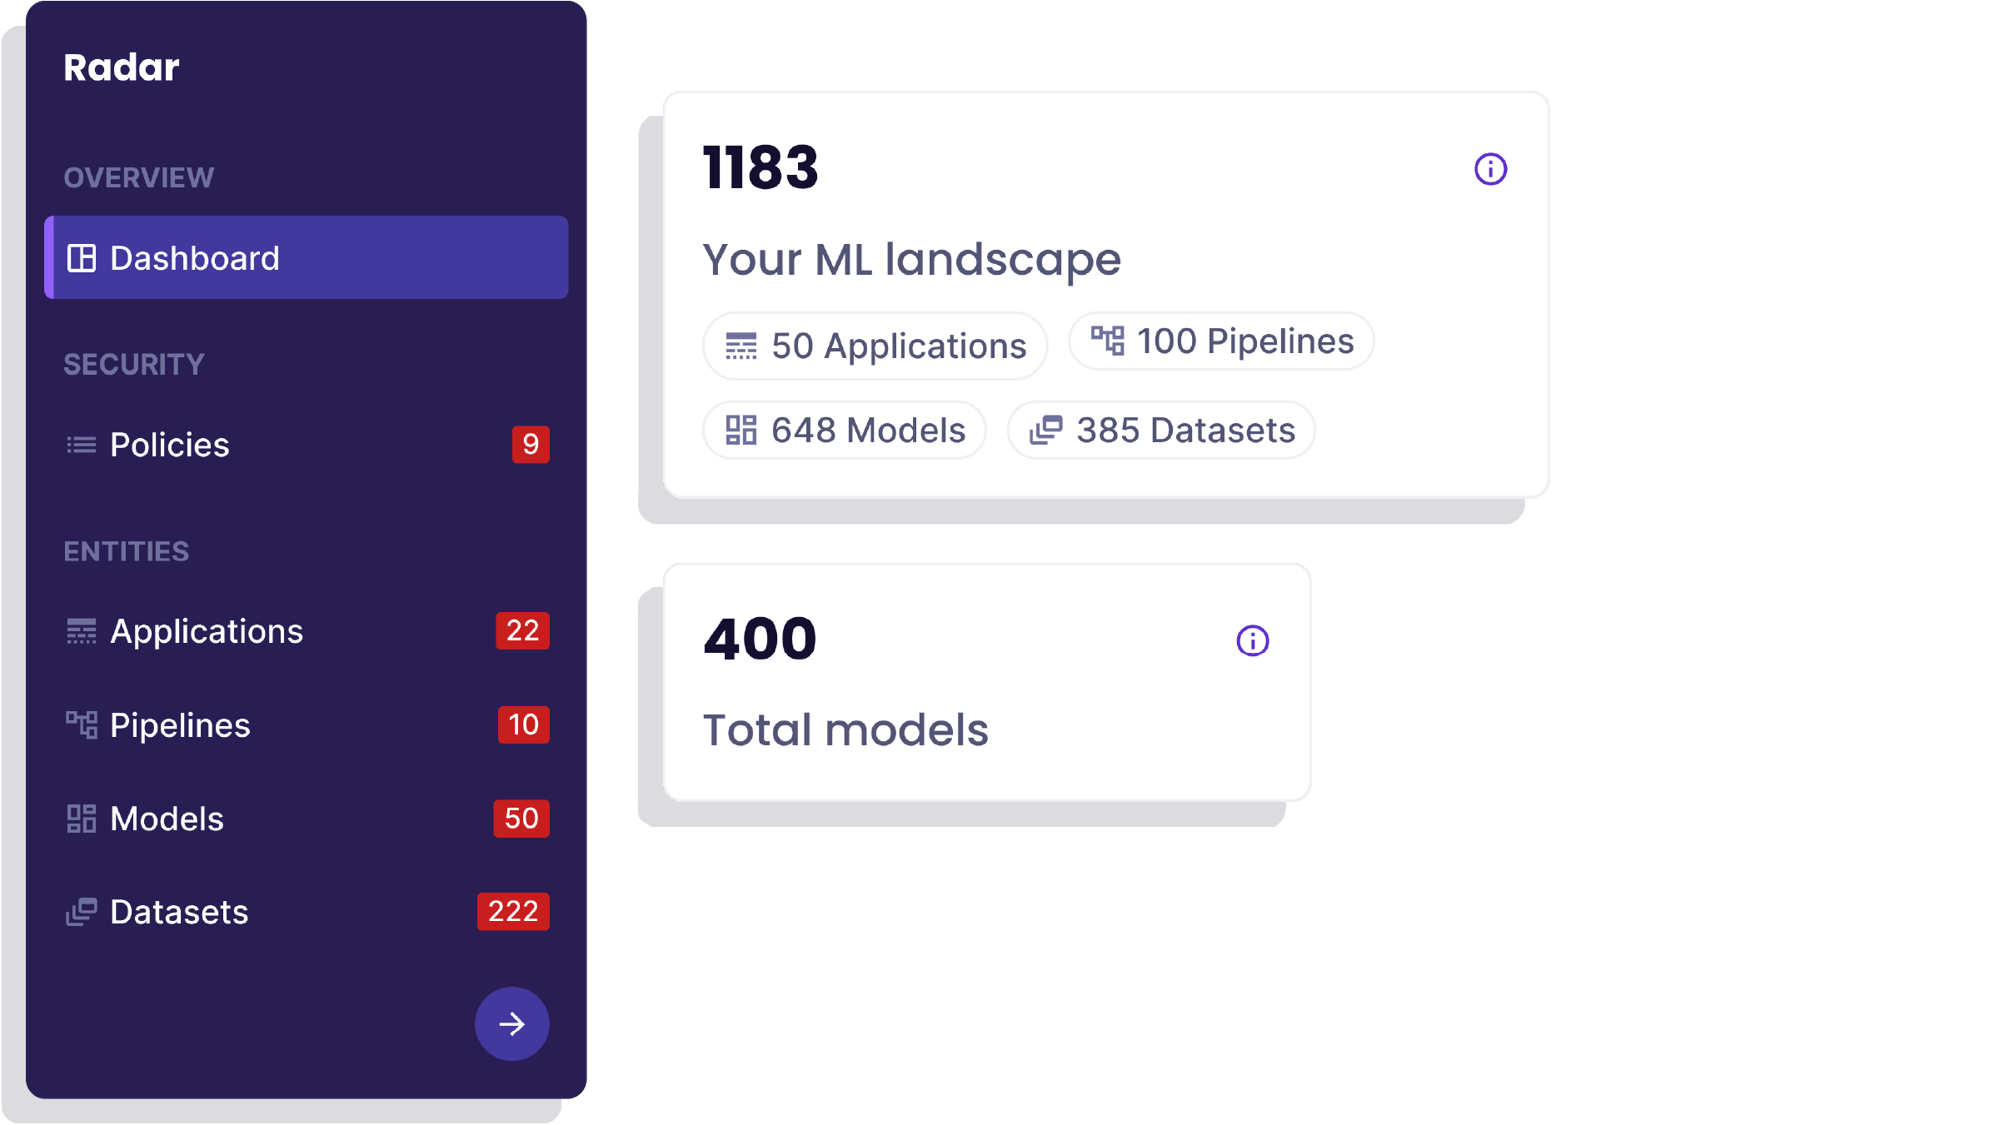 Three screenshots showing the Radar product navigation, ML Landscape overview, and total number of models.